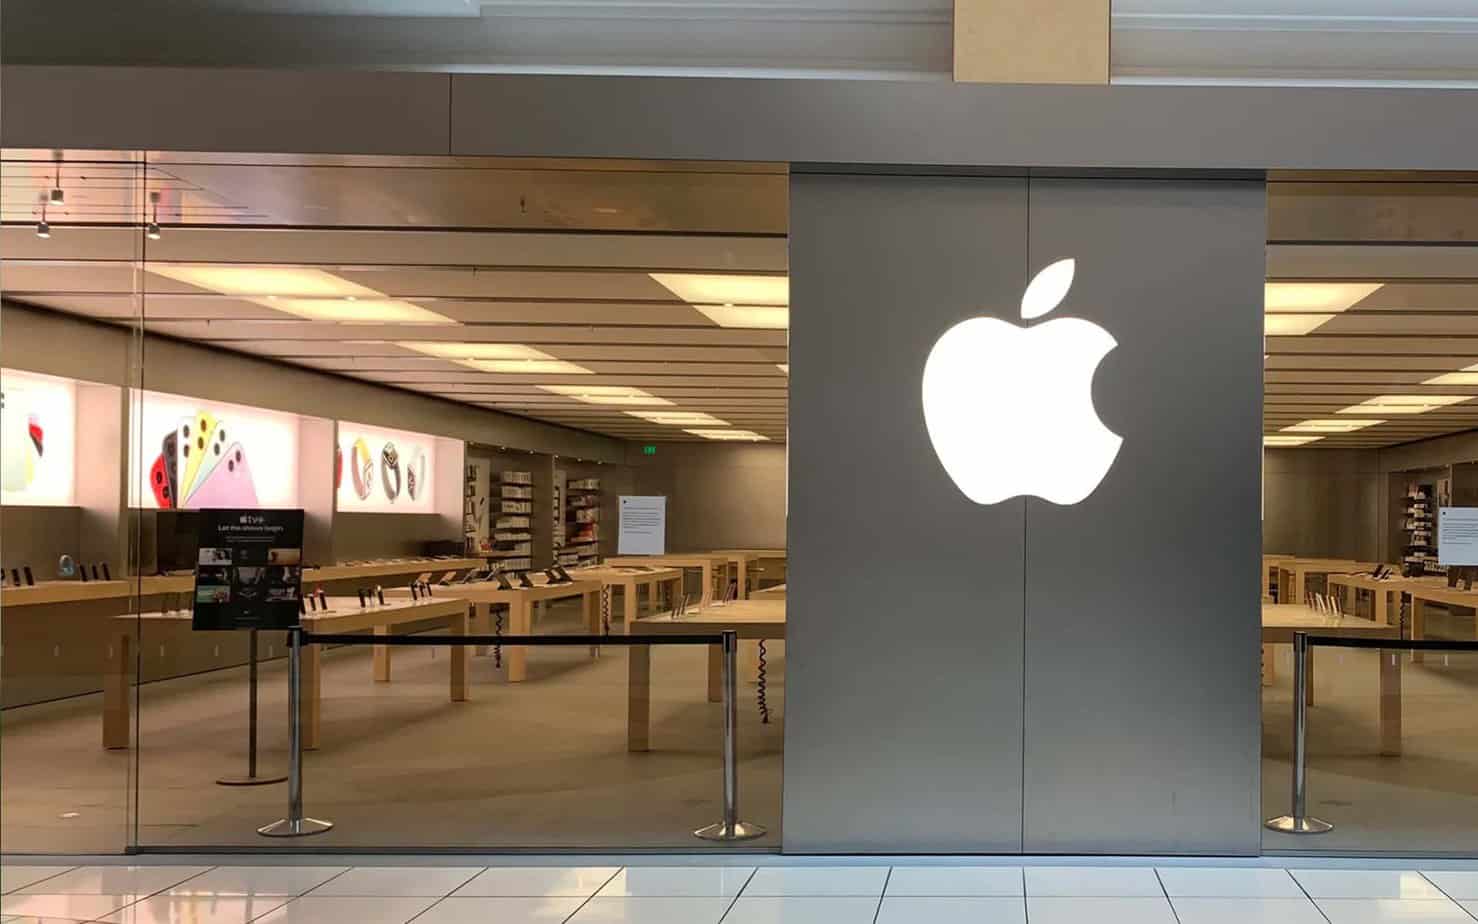 Apple Plans to Reopen Stores Pretty Soon - Next Week Will See Apple Openings